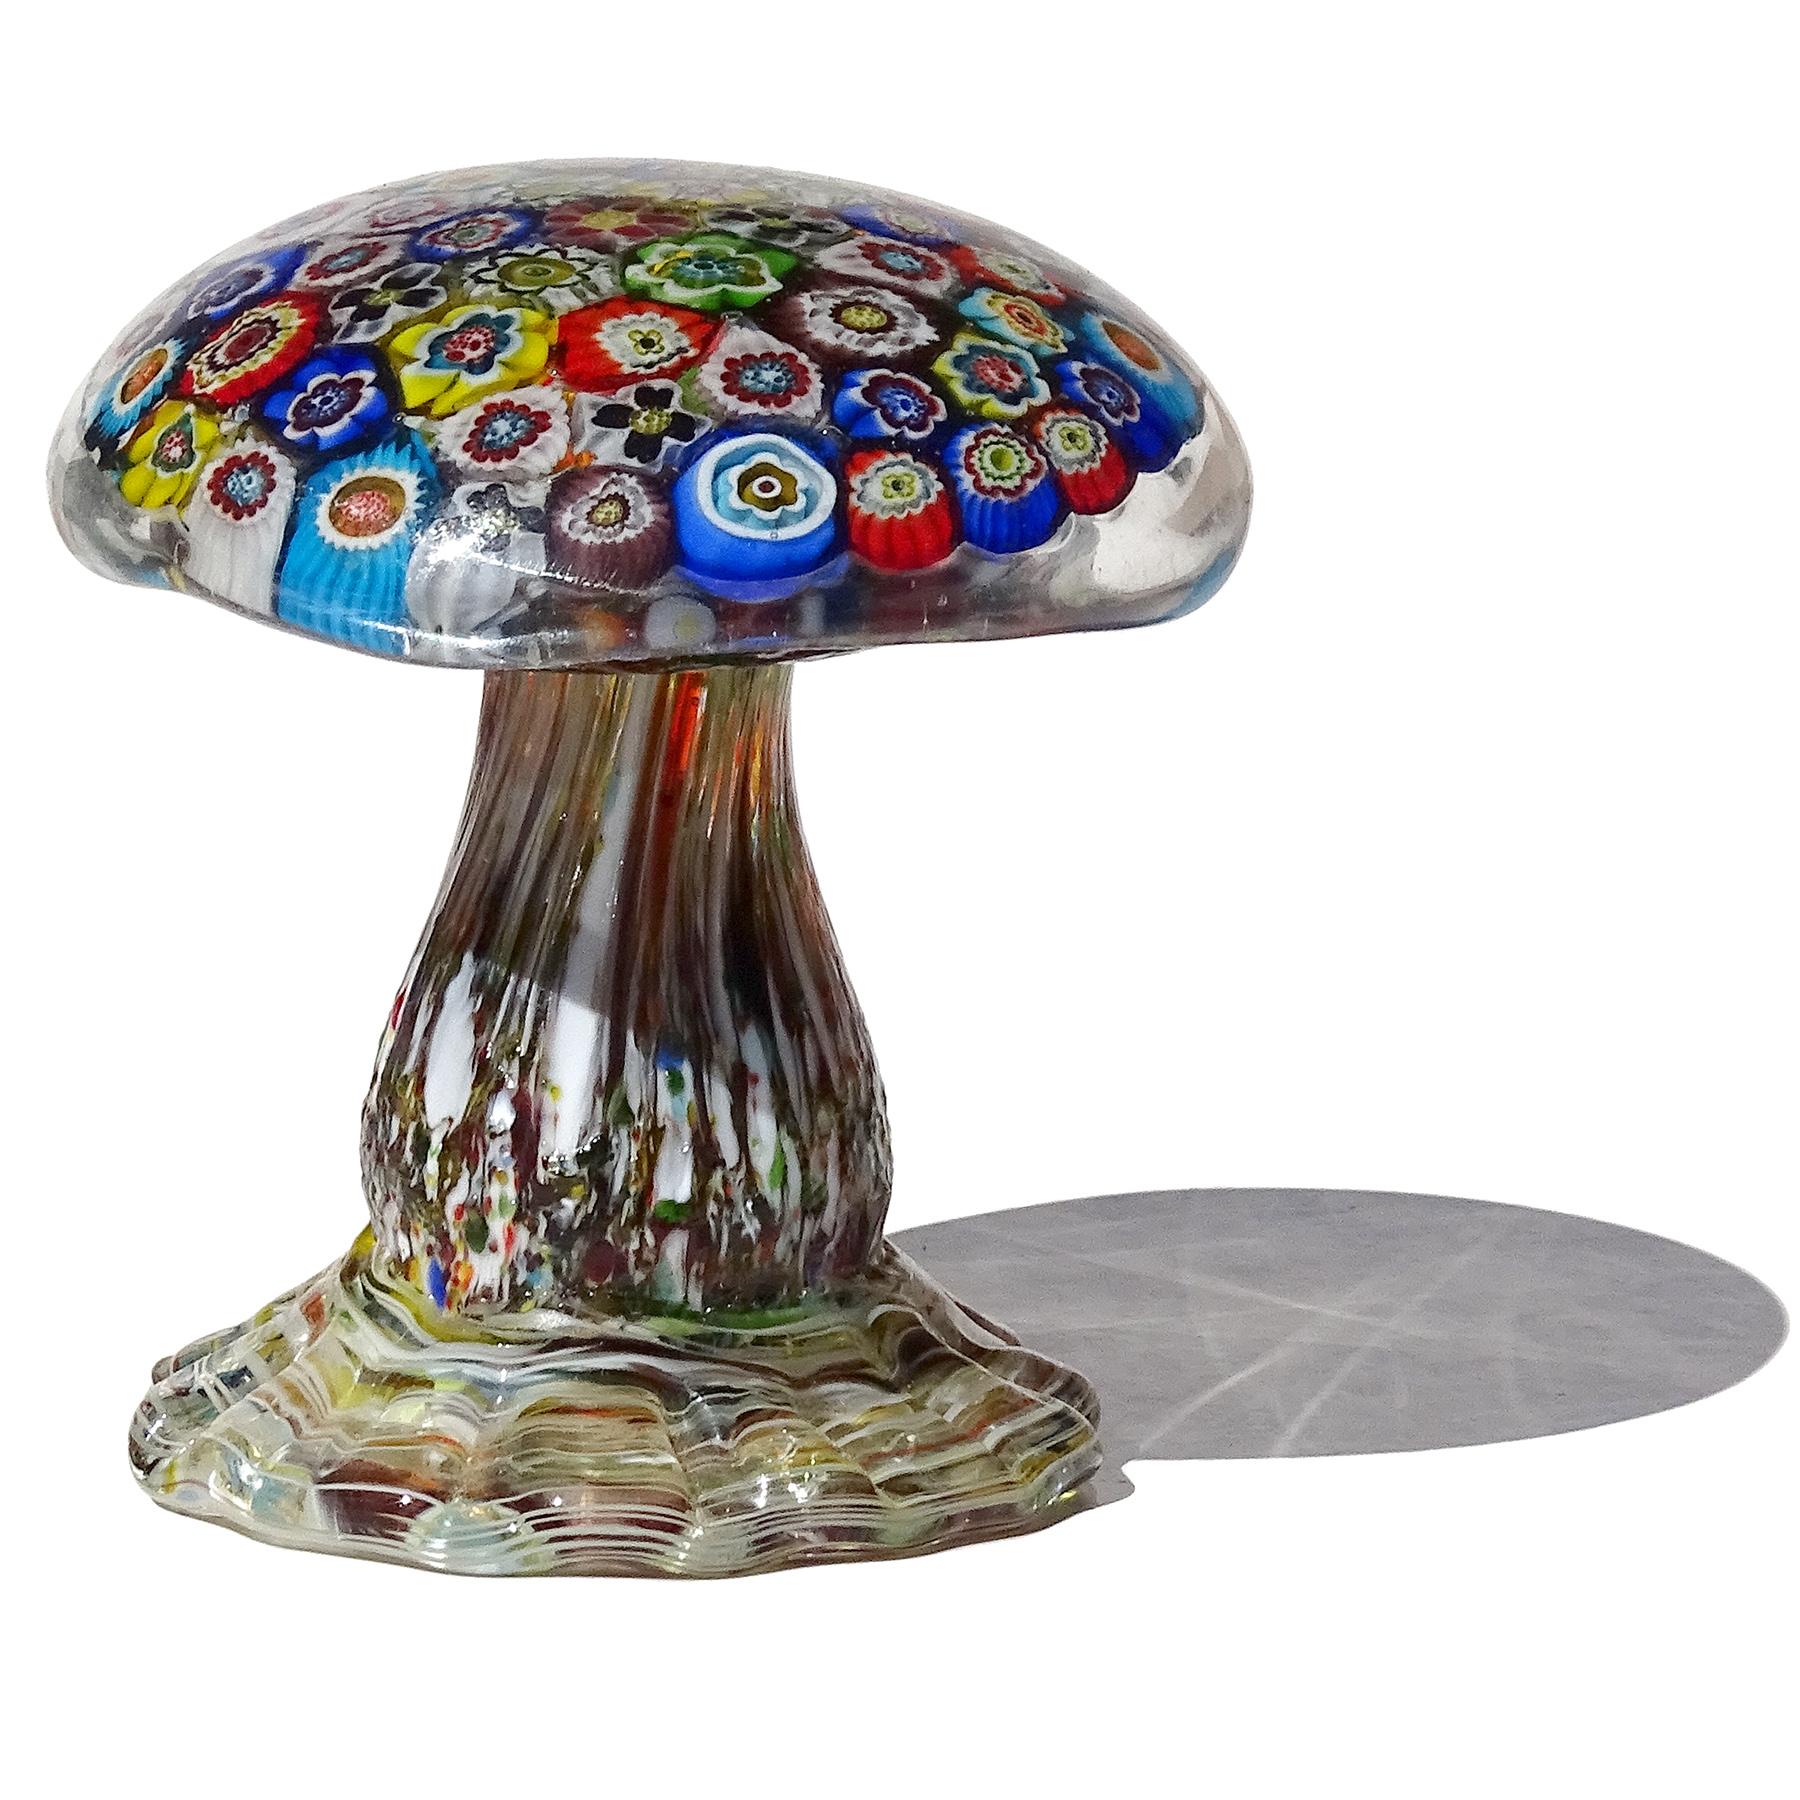 Beautiful and very unusual, vintage Murano hand blown multicolor millefiori flowers Italian art glass mushroom / toadstool sculptural paperweight. The mushroom is created in the manner of the Avem company. The top is filled with a multitude of